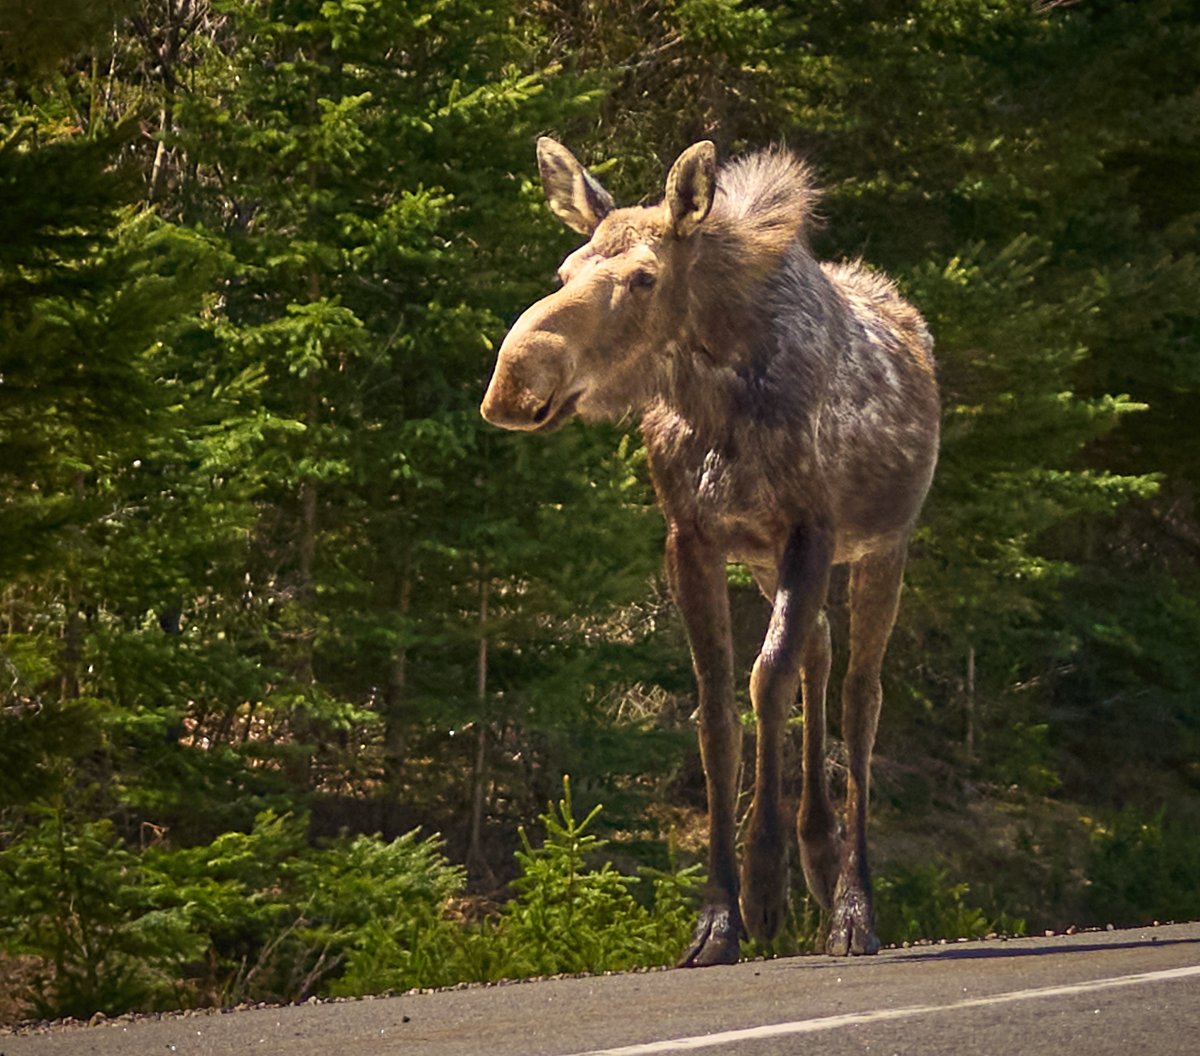 We finally see moose—not far from home, by @CheeseLoverG open.substack.com/pub/onroadatse…